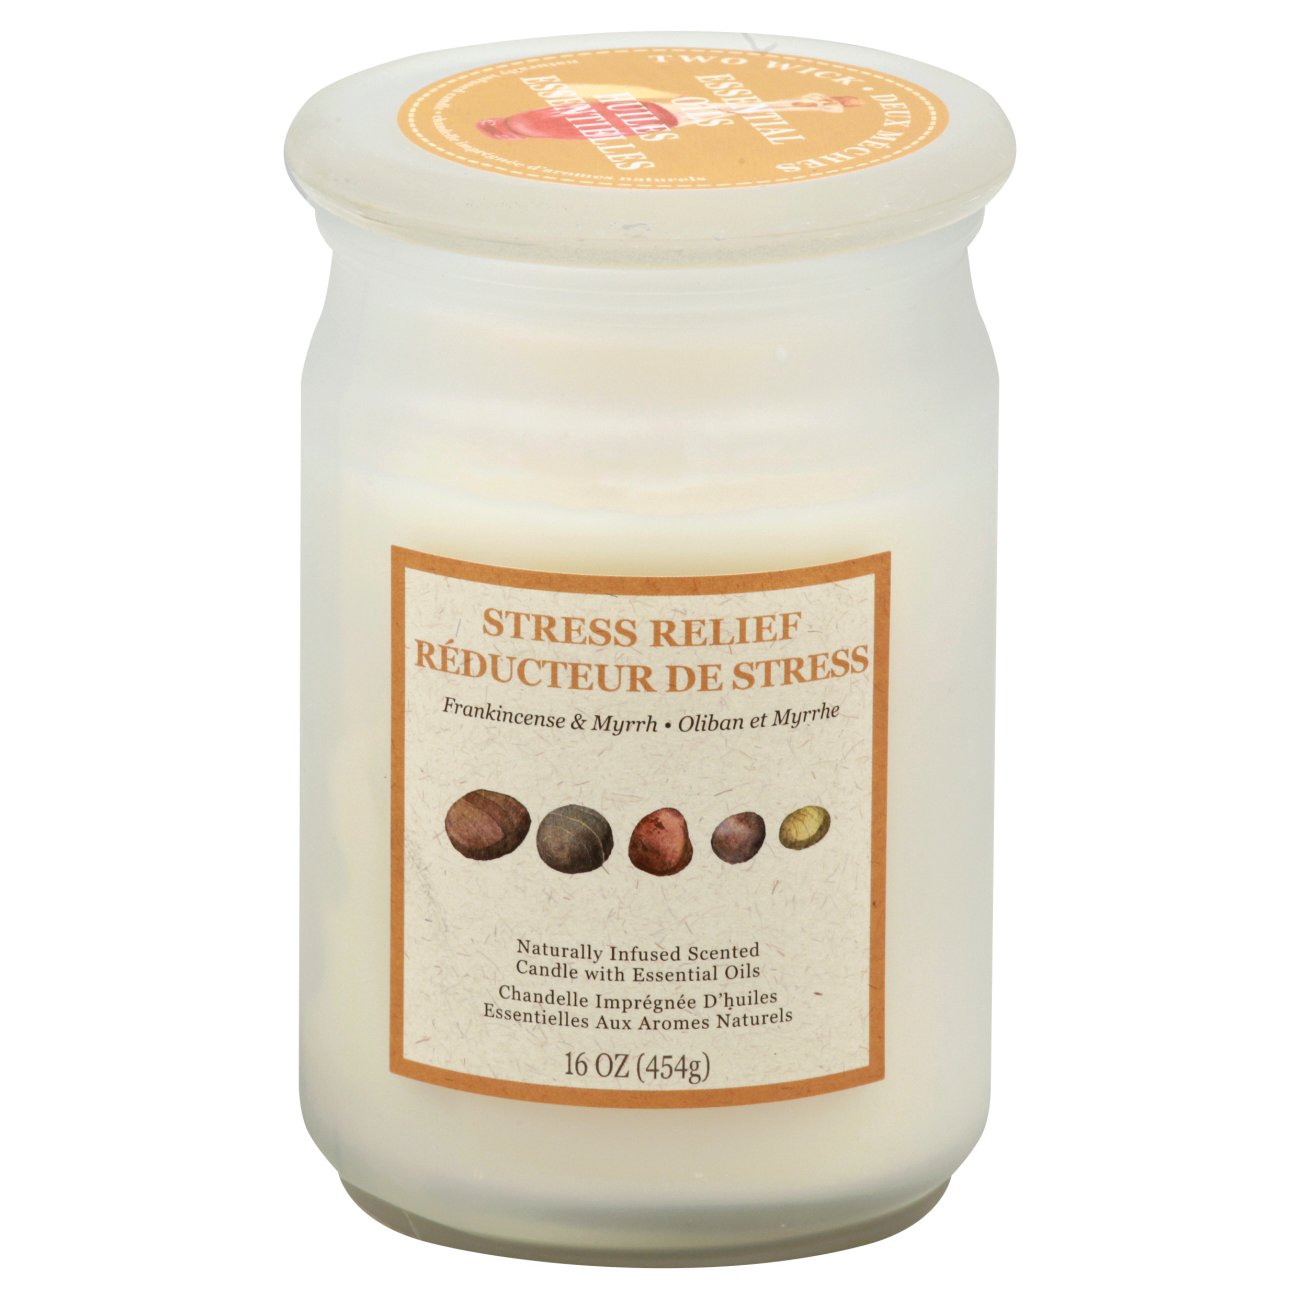 Star Candle Frankincense & Myrrh Scented Stress Relief Candle - Shop Candles  at H-E-B